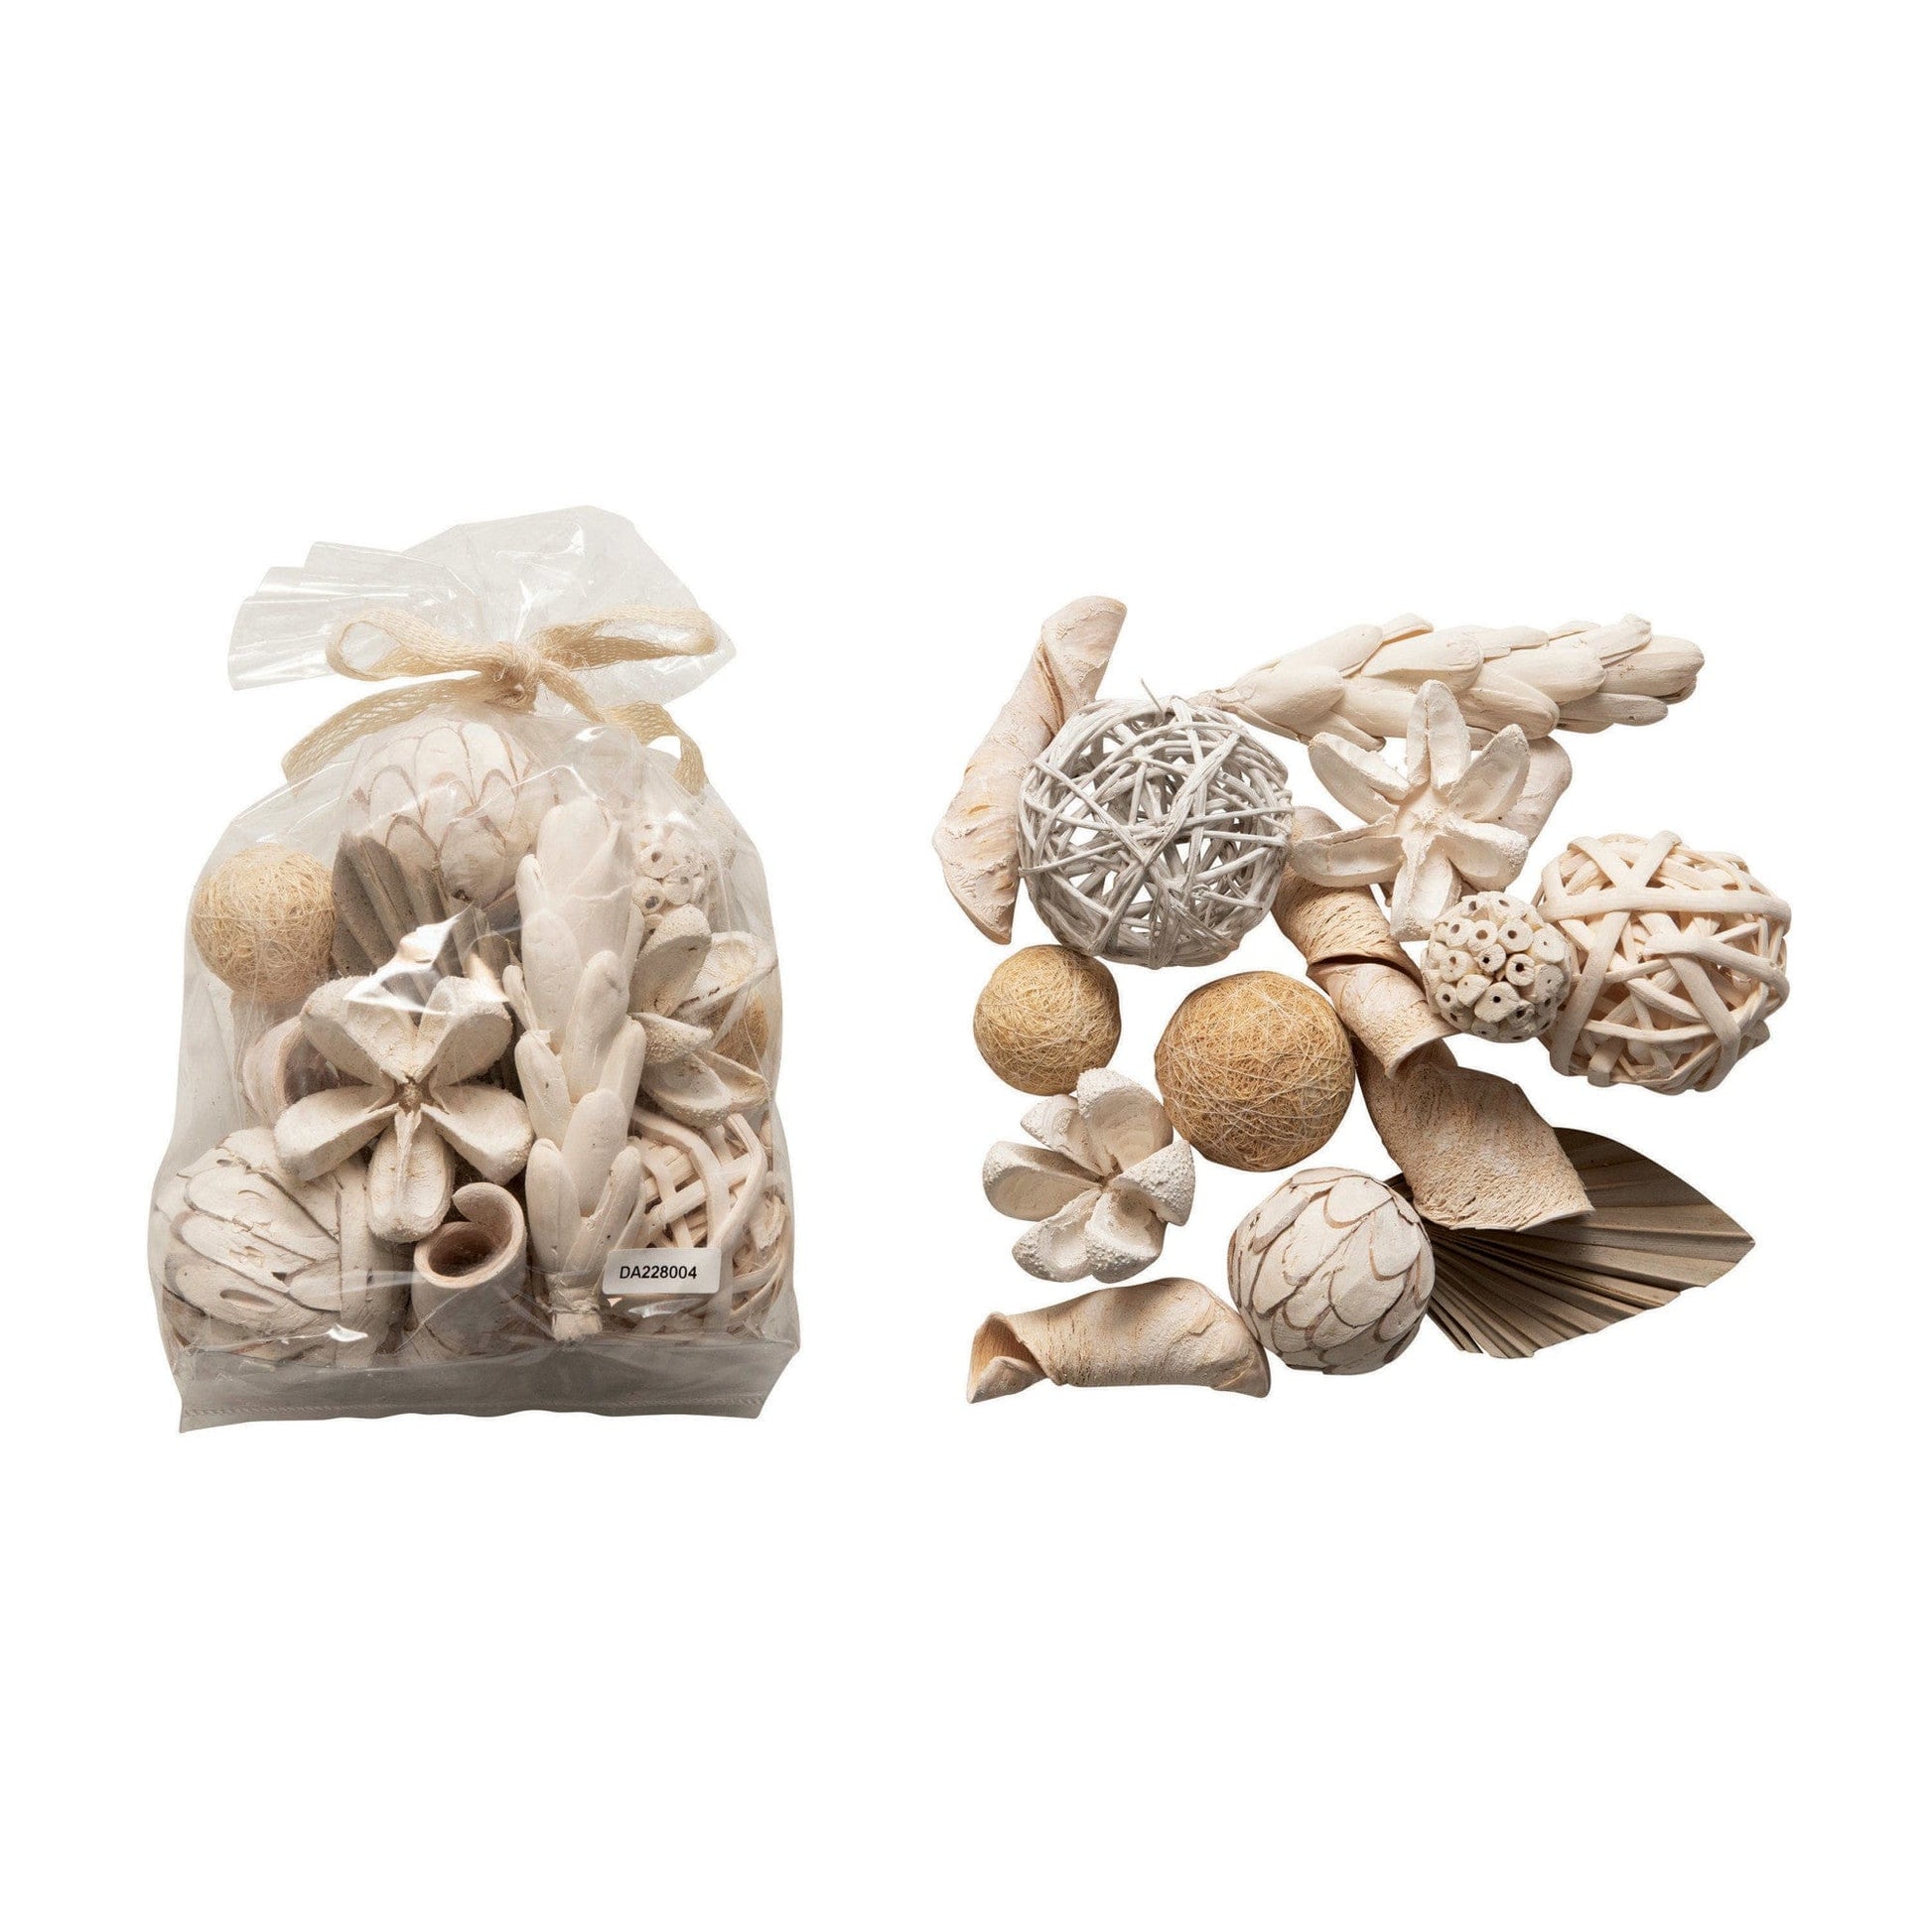 Dried Natural Organic Mix in Bag with Whitewash Finish - Five and Divine